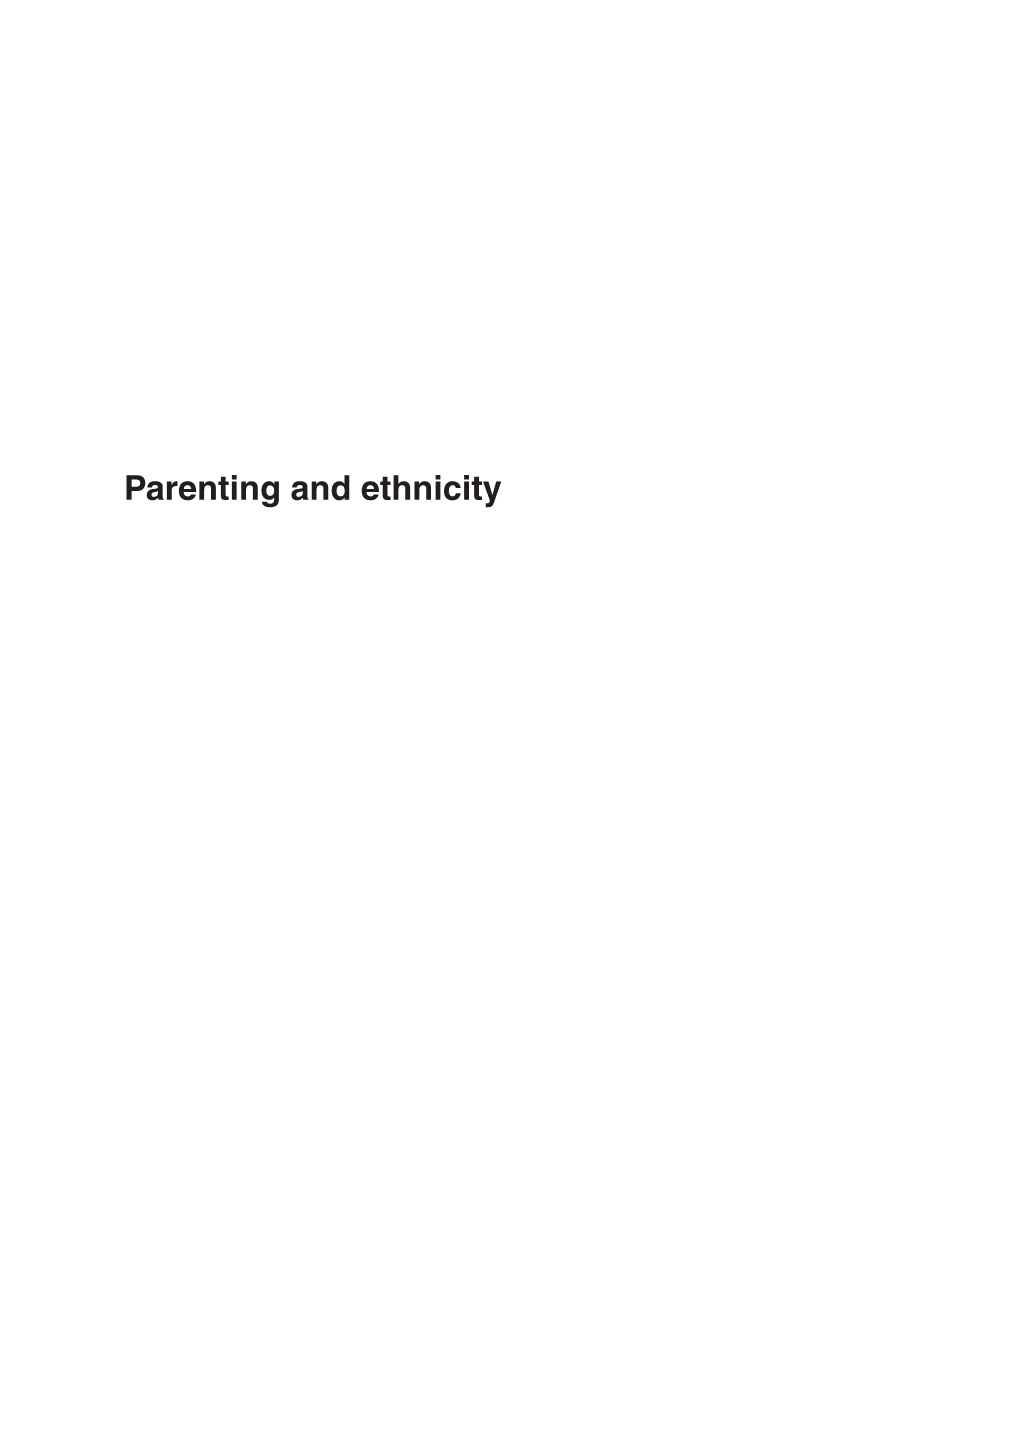 Parenting and Ethnicity This Publication Can Be Provided in Other Formats, Such As Large Print, Braille and Audio